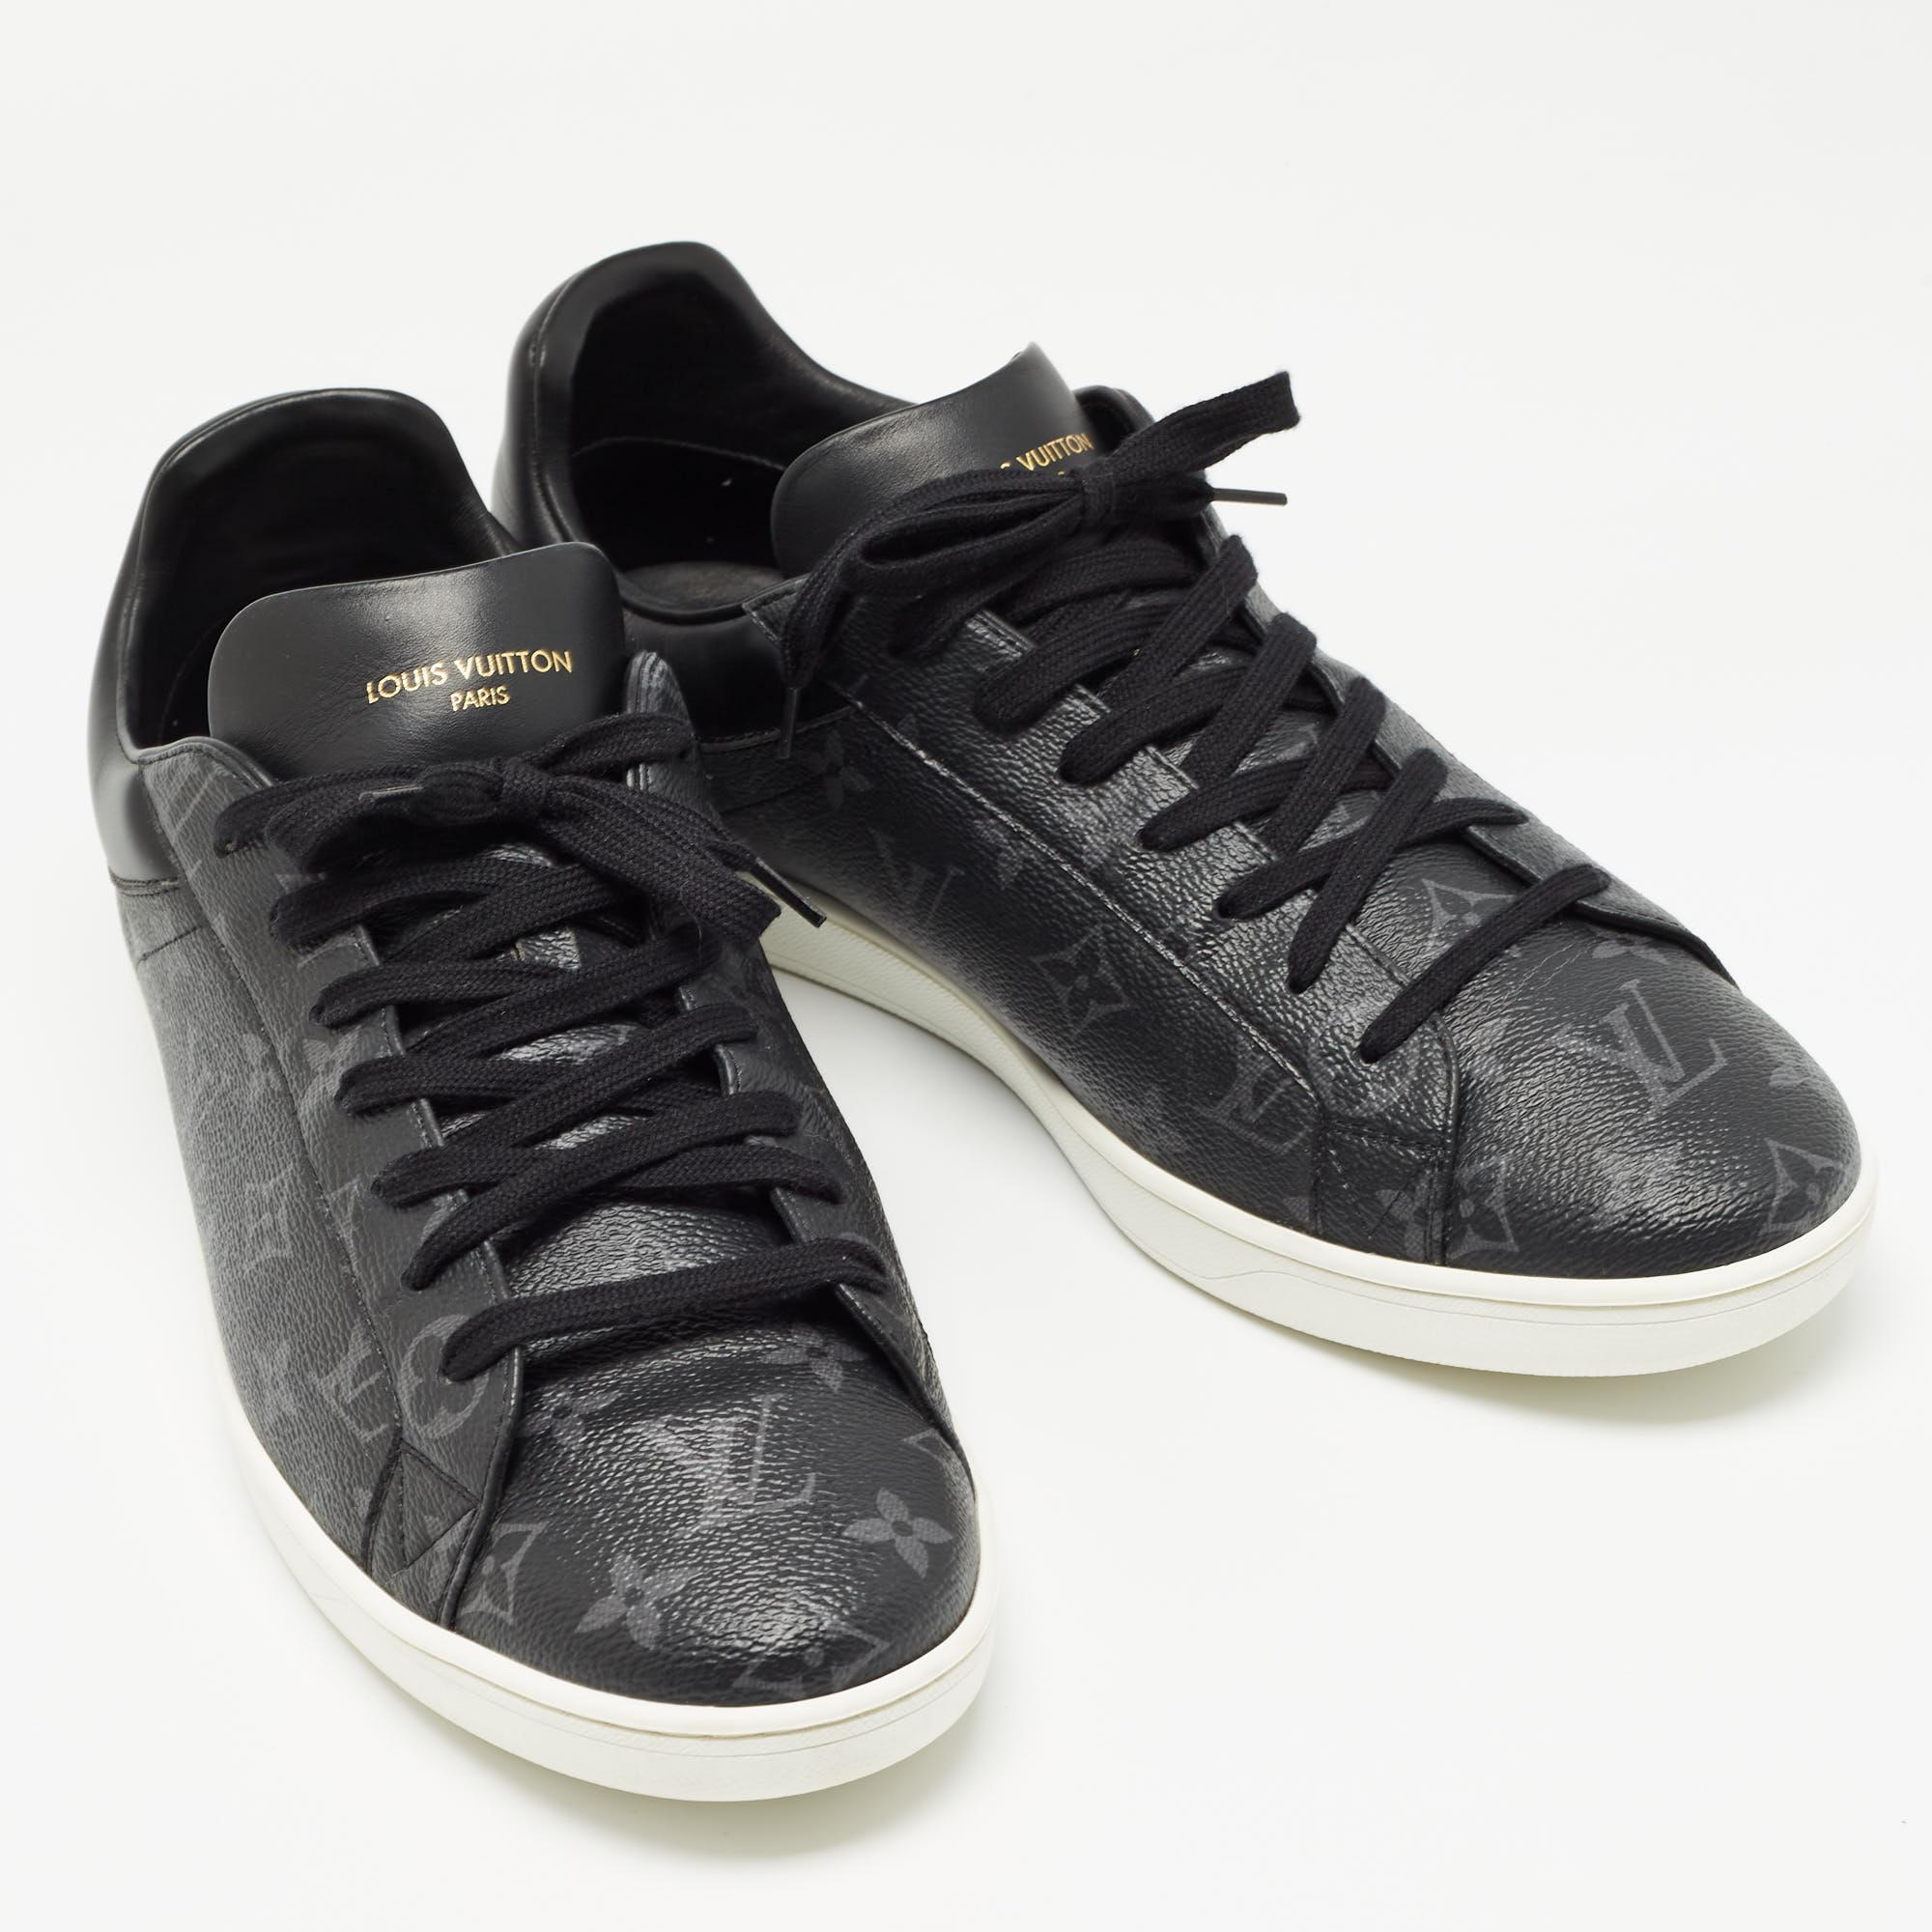 Louis Vuitton Monogram Eclipse Luxembourg Sneakers Size 46 1